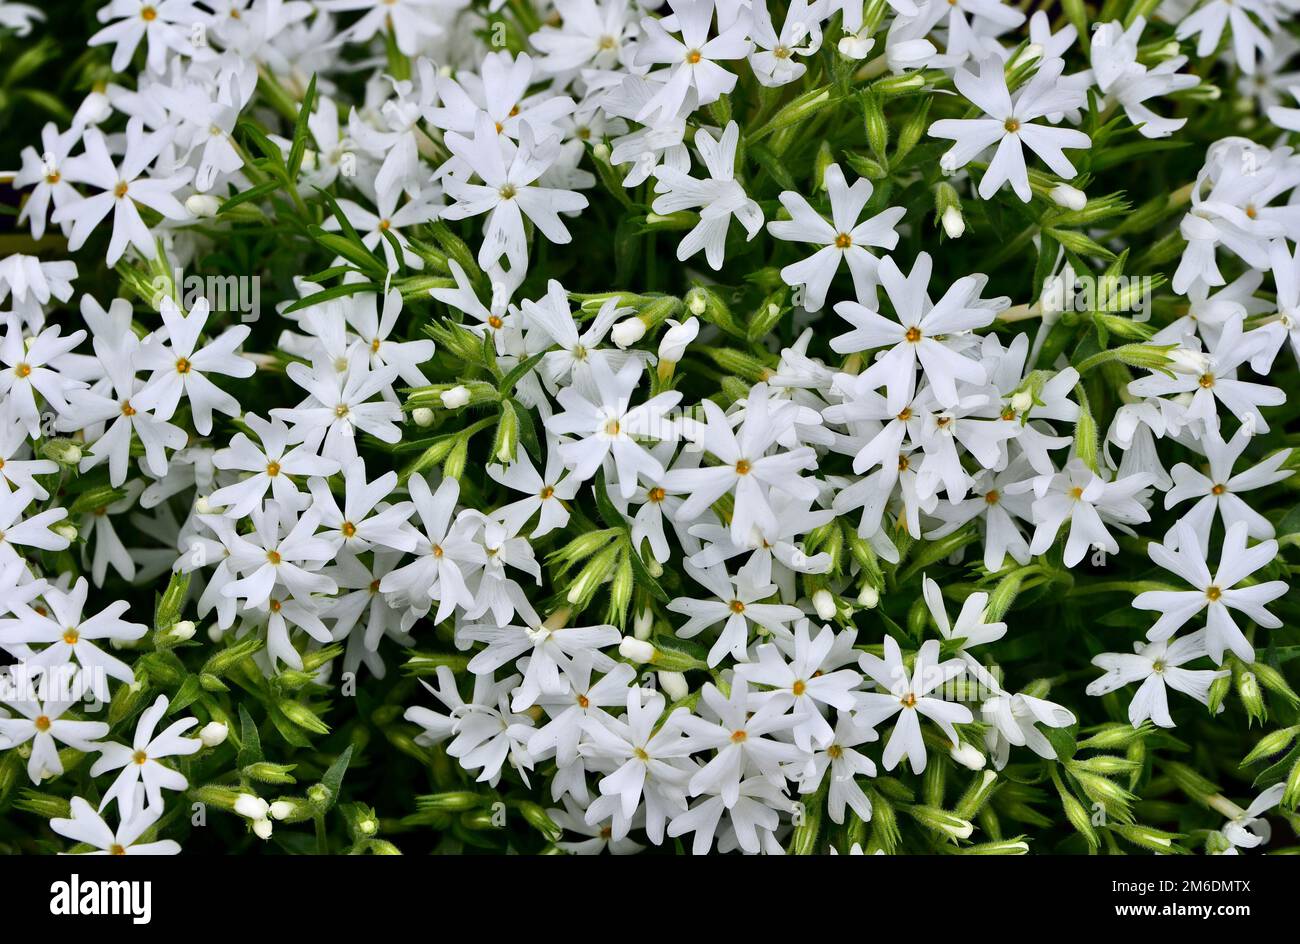 A closeup shot of the white creeping phlox flowers blooming in the garden on a sunny day Stock Photo